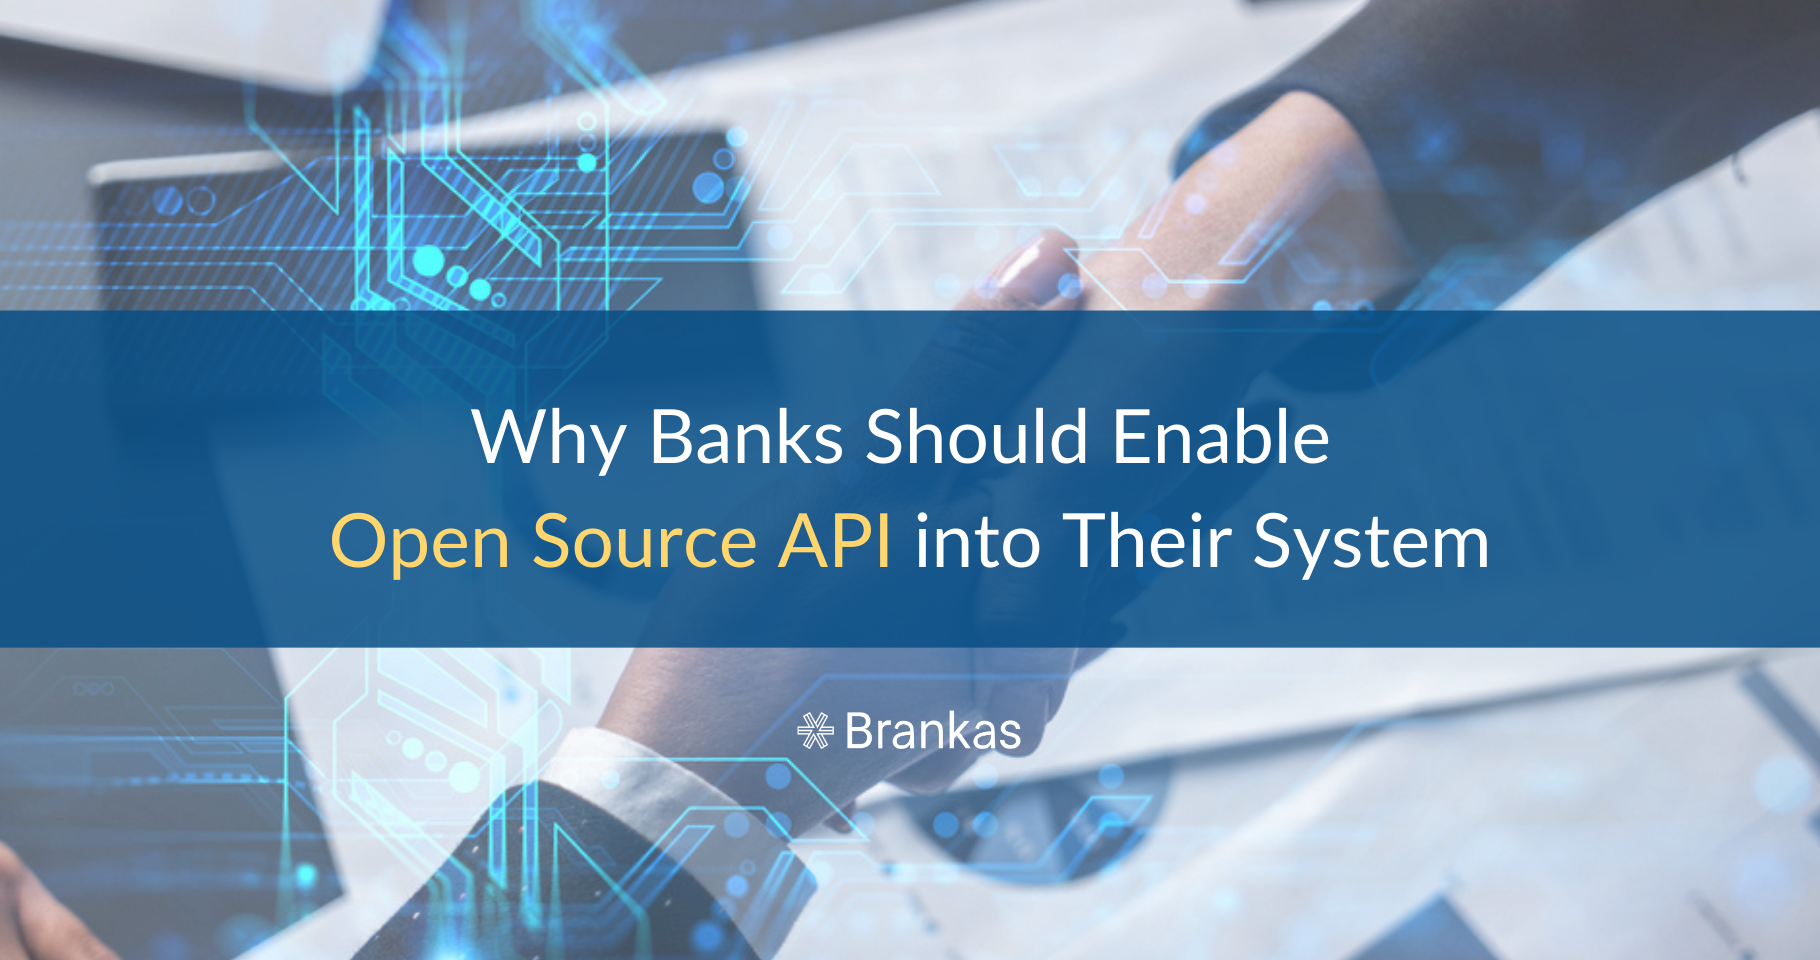 Why Banks Should Enable Open Source API into Their System